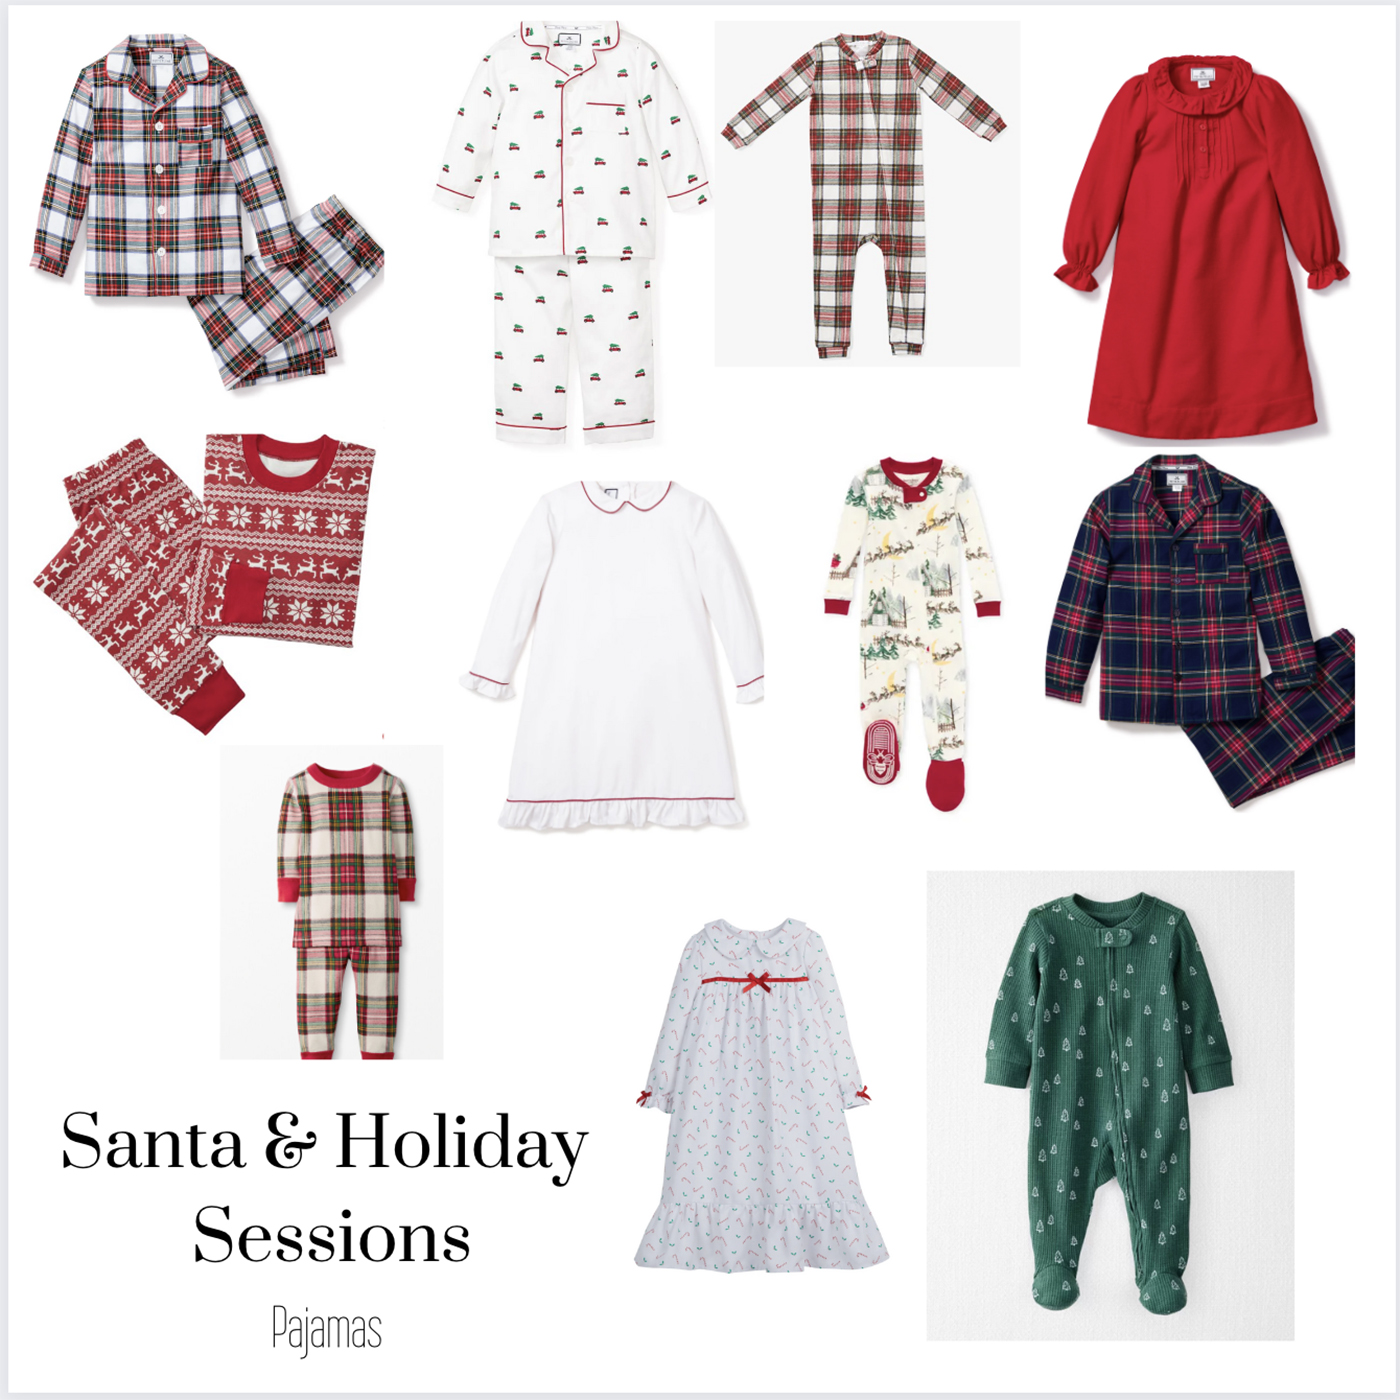  different pajama options for santa and holiday photography sessions